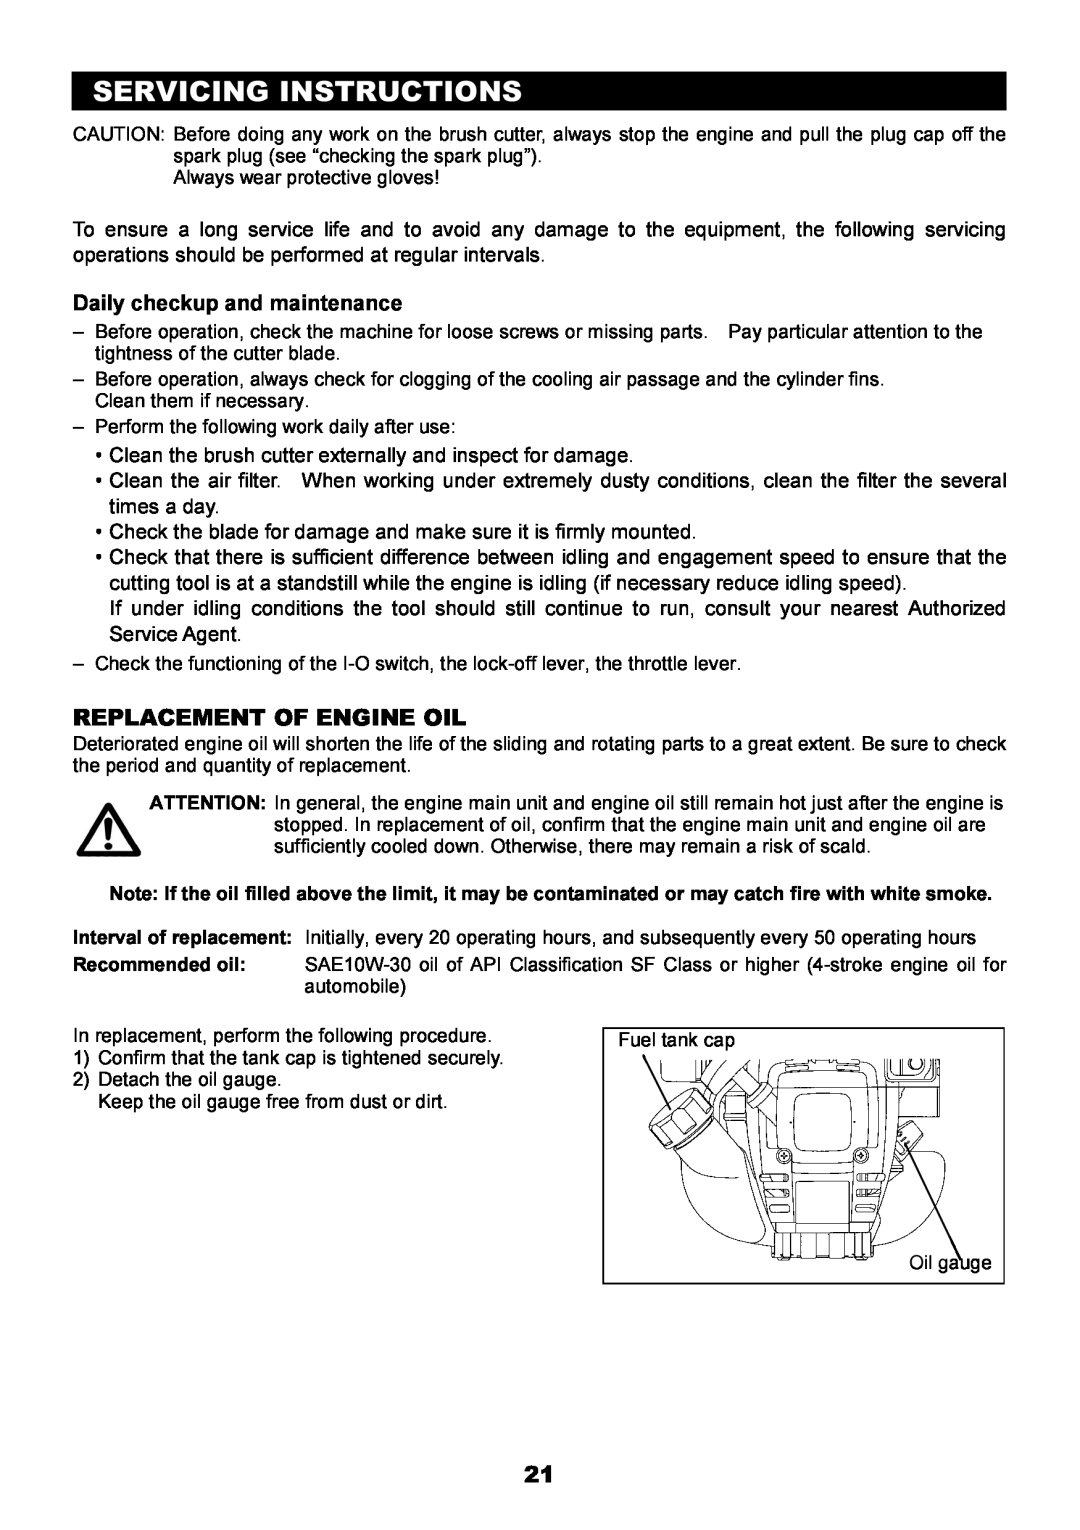 Makita EBH340U instruction manual Servicing Instructions, Replacement Of Engine Oil 